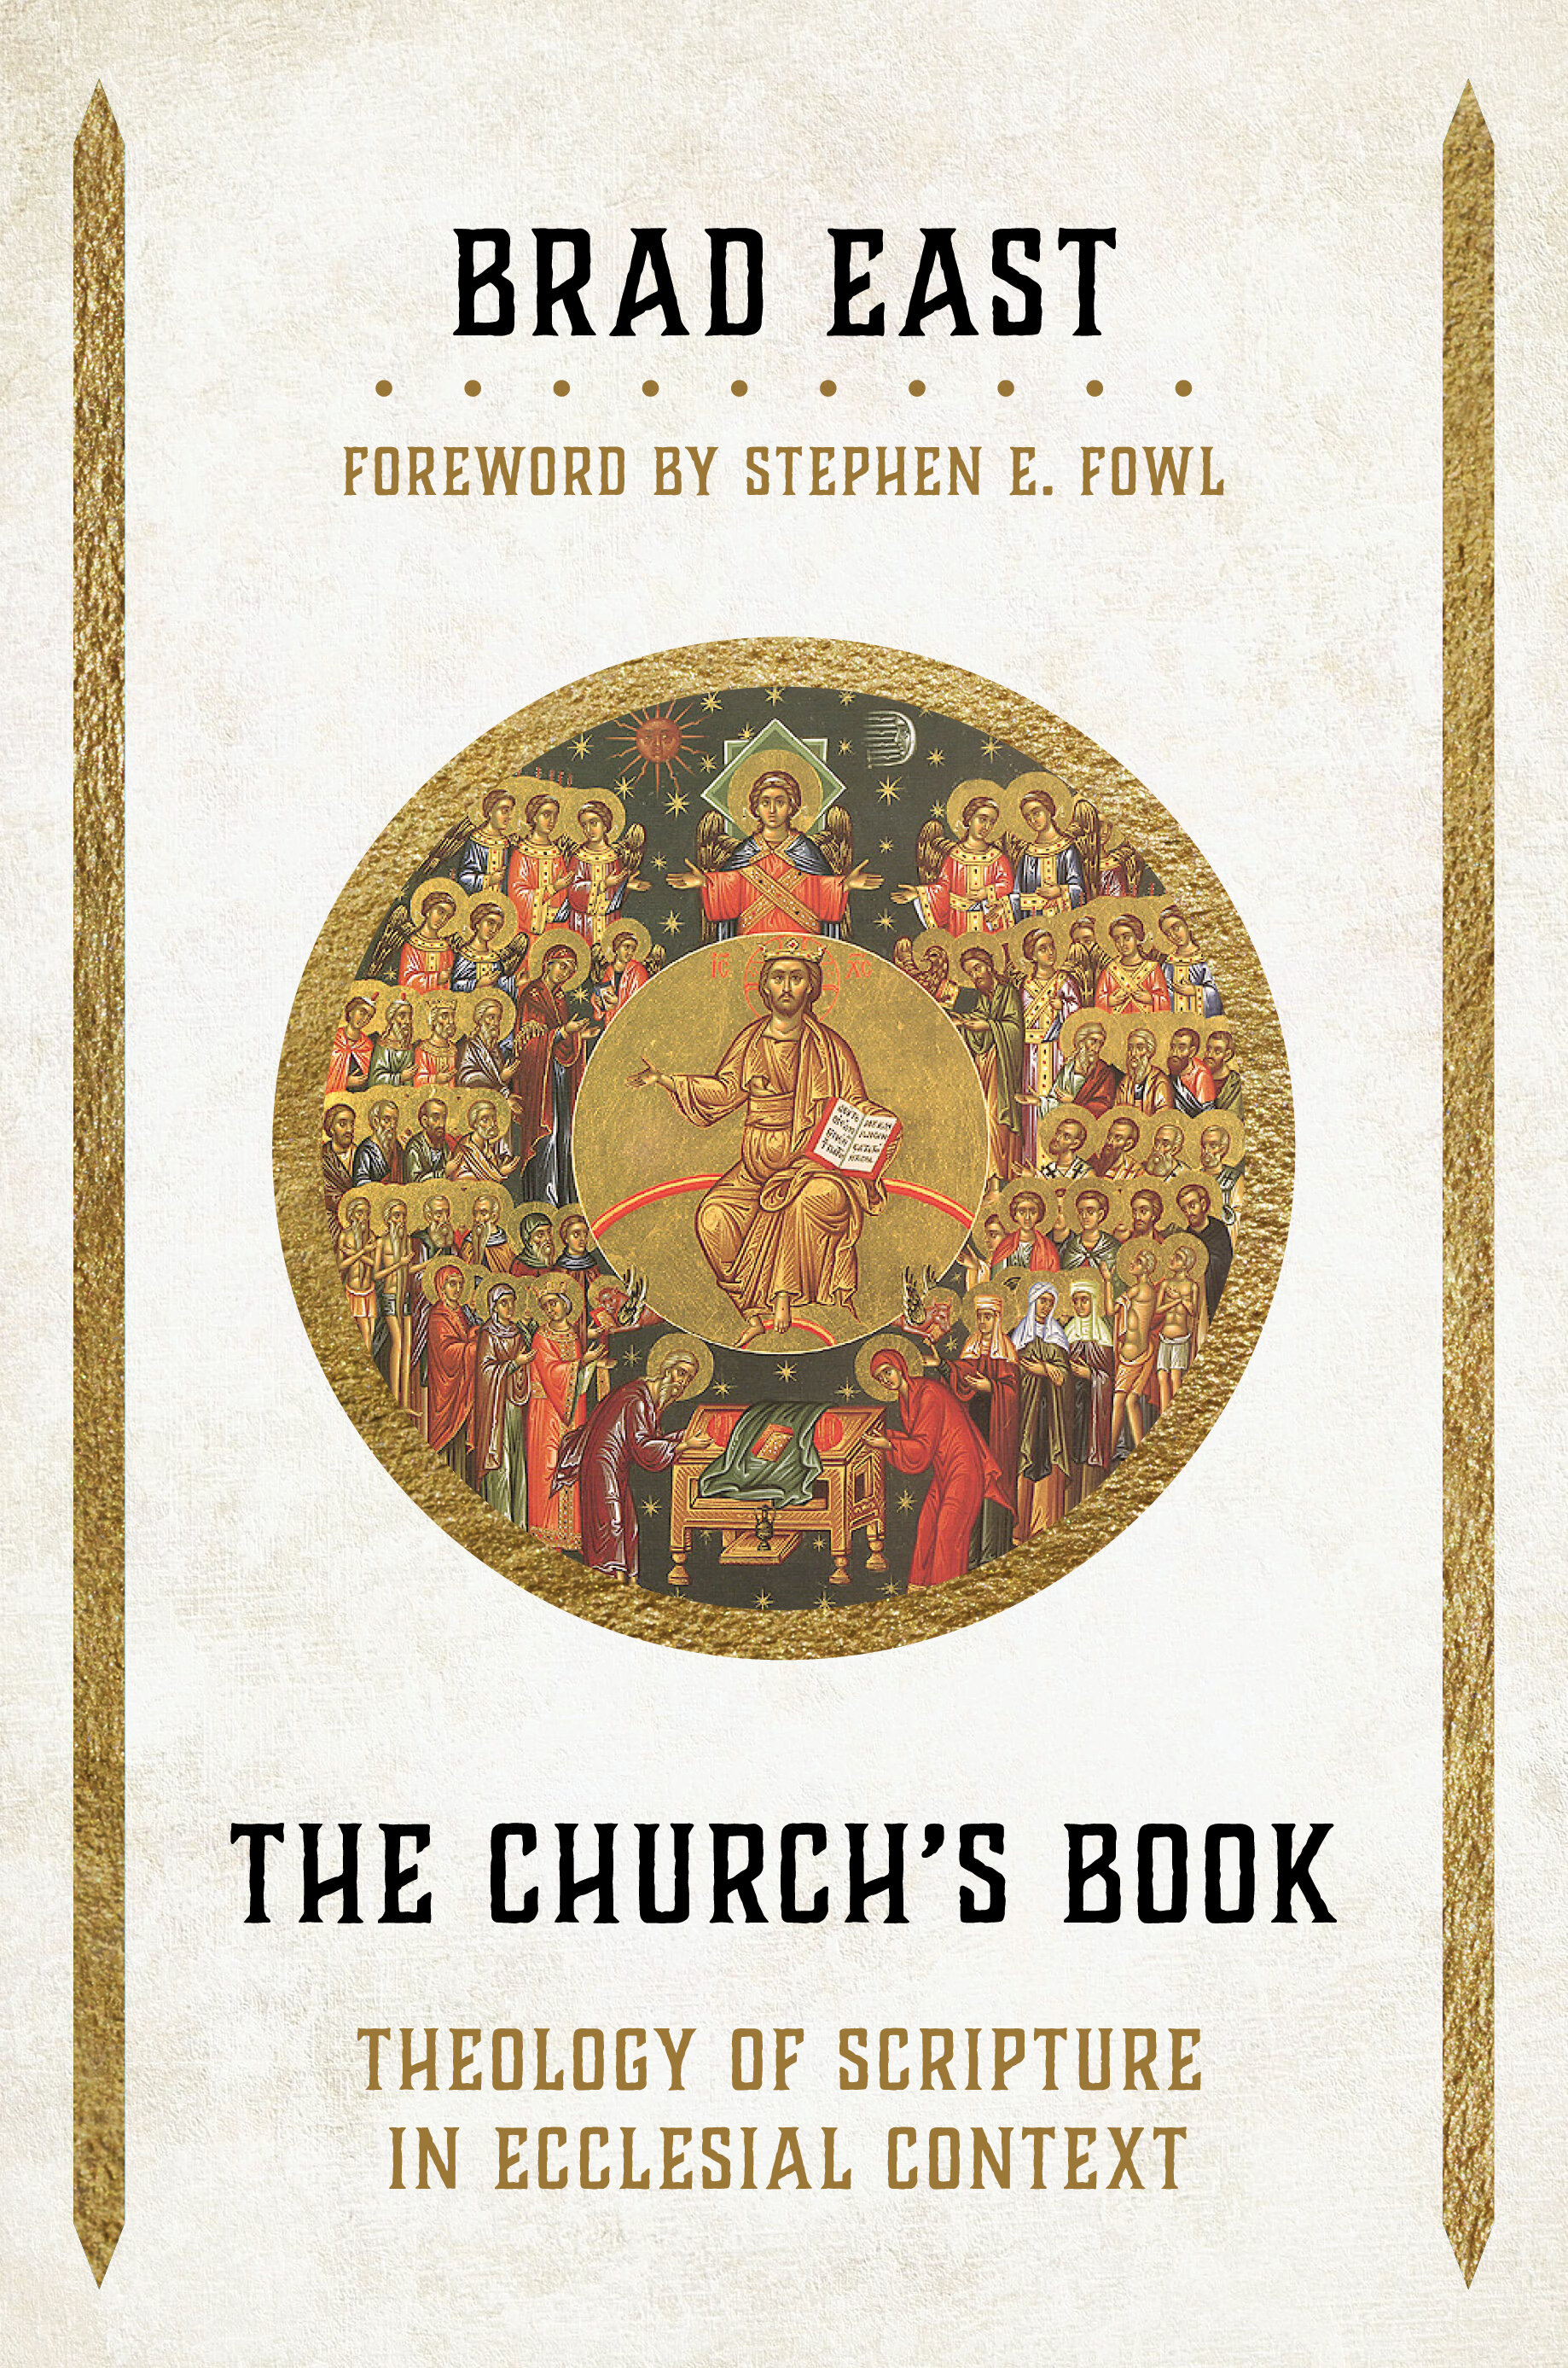 The Church’s Book: Theology of Scripture in Ecclesial Context